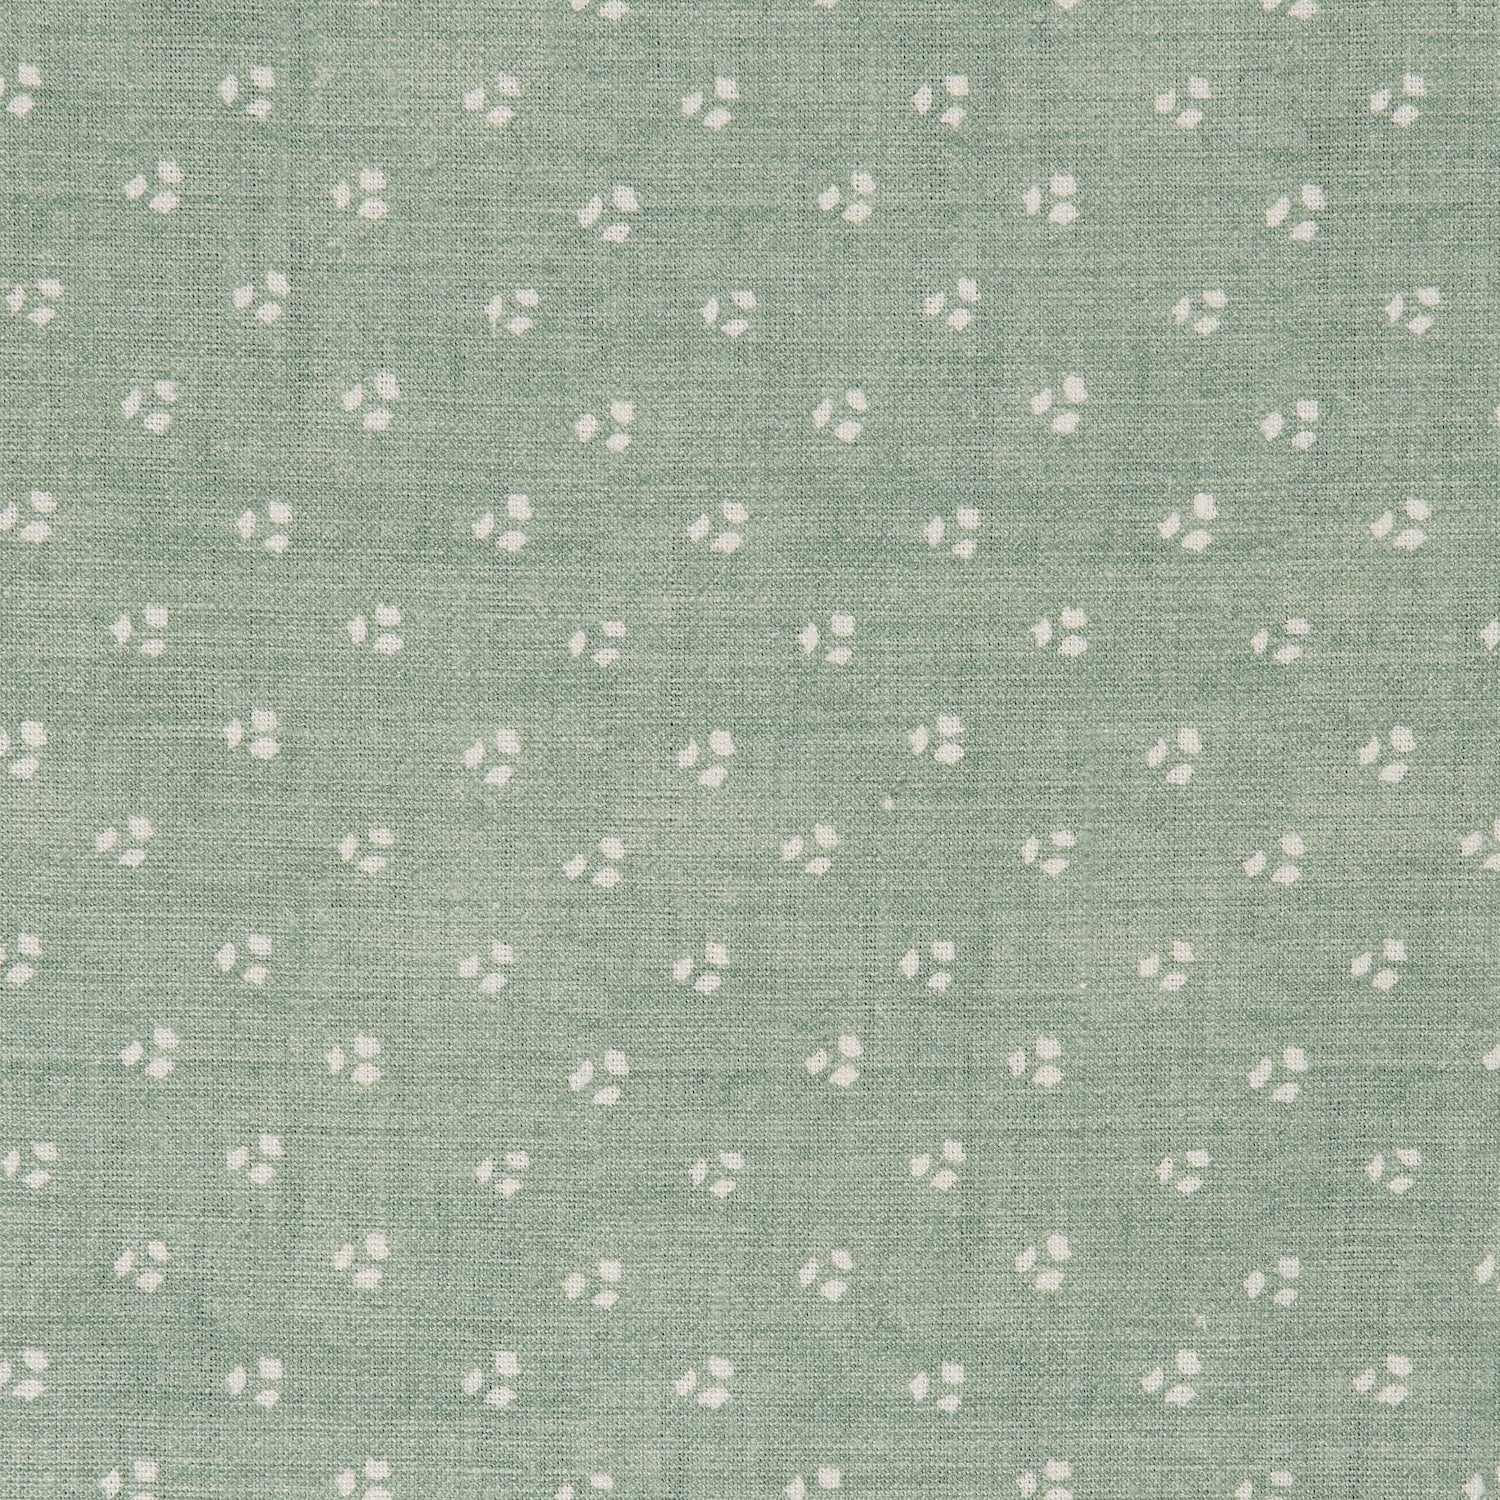 Detail of a linen fabric in a clustered dot pattern in cream on a sage field.